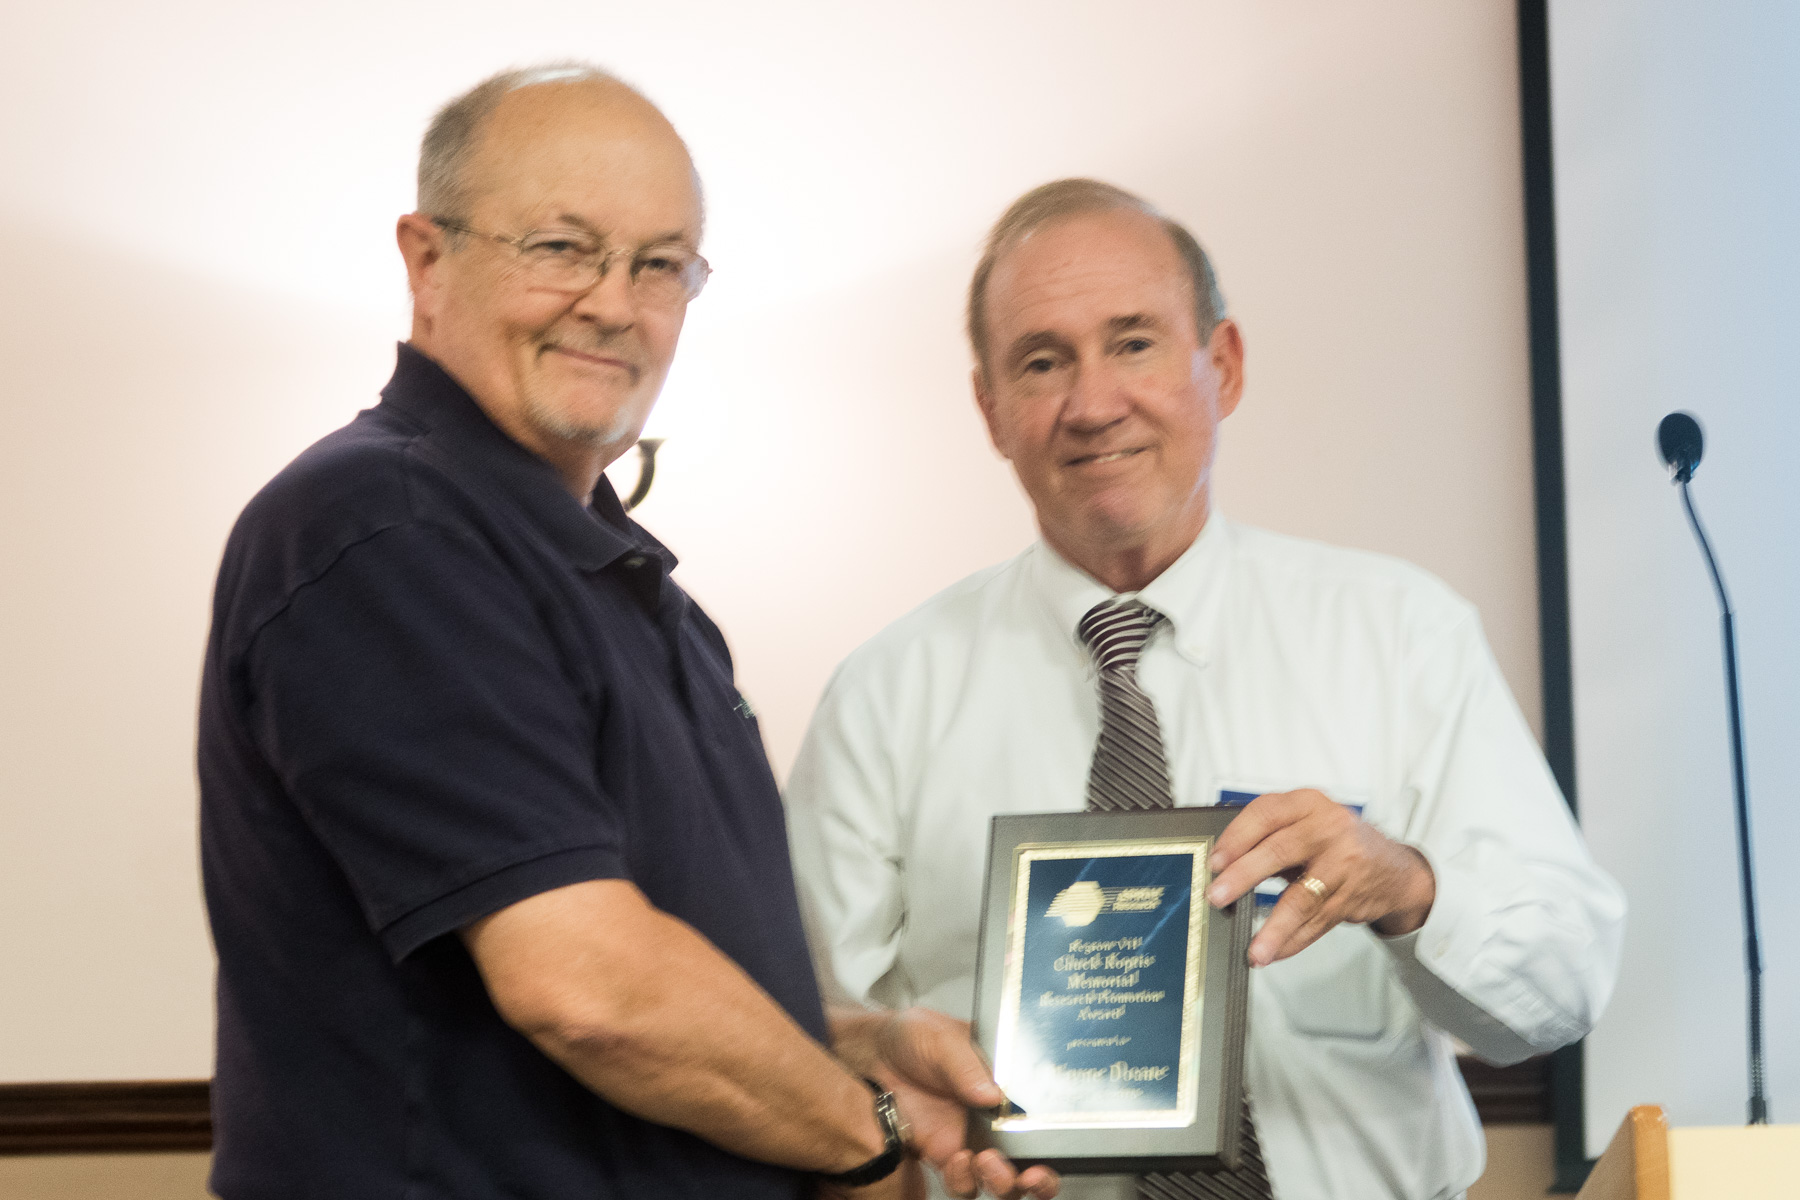  Wayne Doane, accepting the Chuck Koptis Award from outgoing RVC for Research, John Sealy 